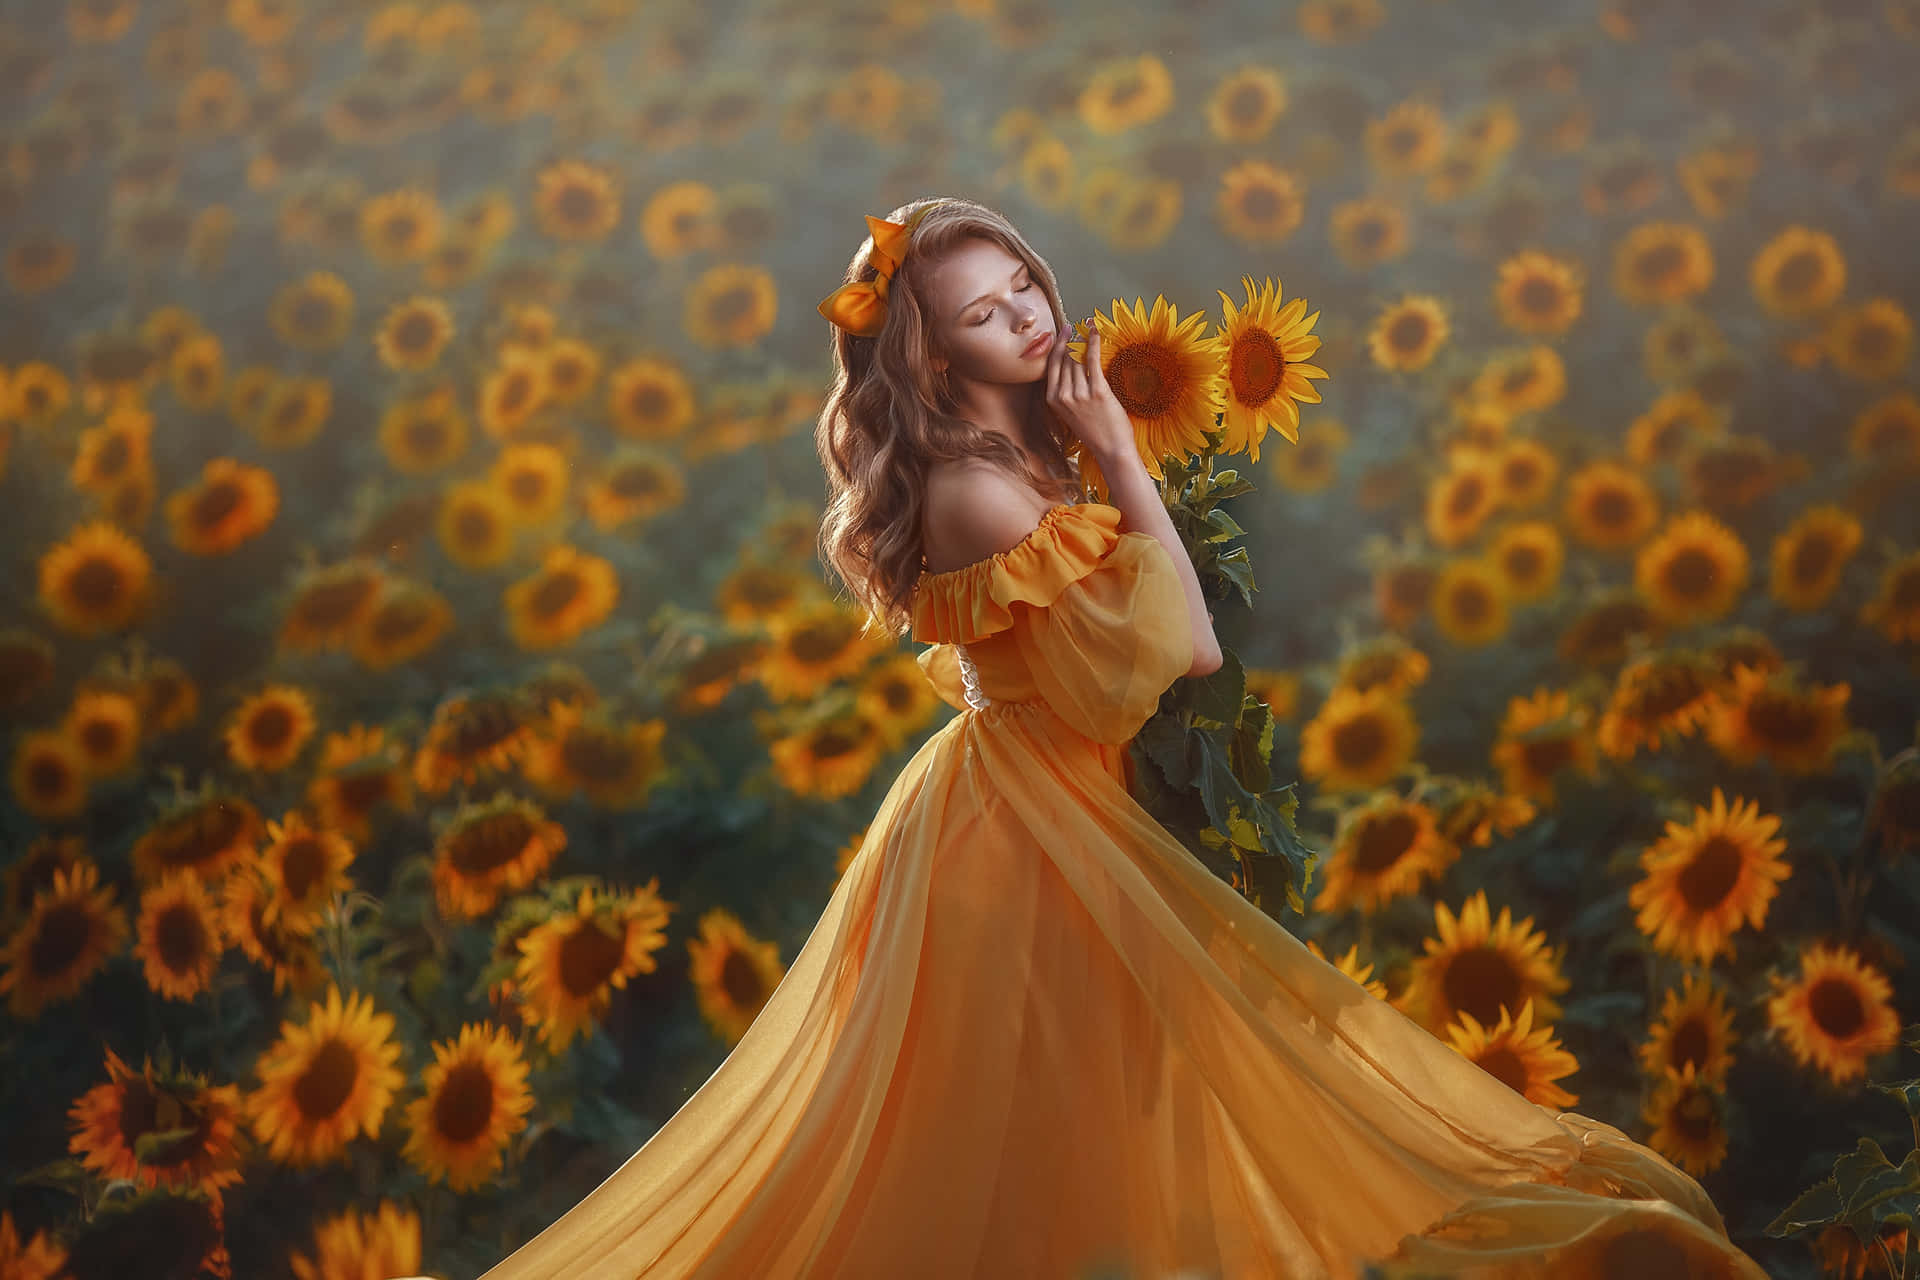 A Girl In A Yellow Dress Is Standing In A Field Of Sunflowers